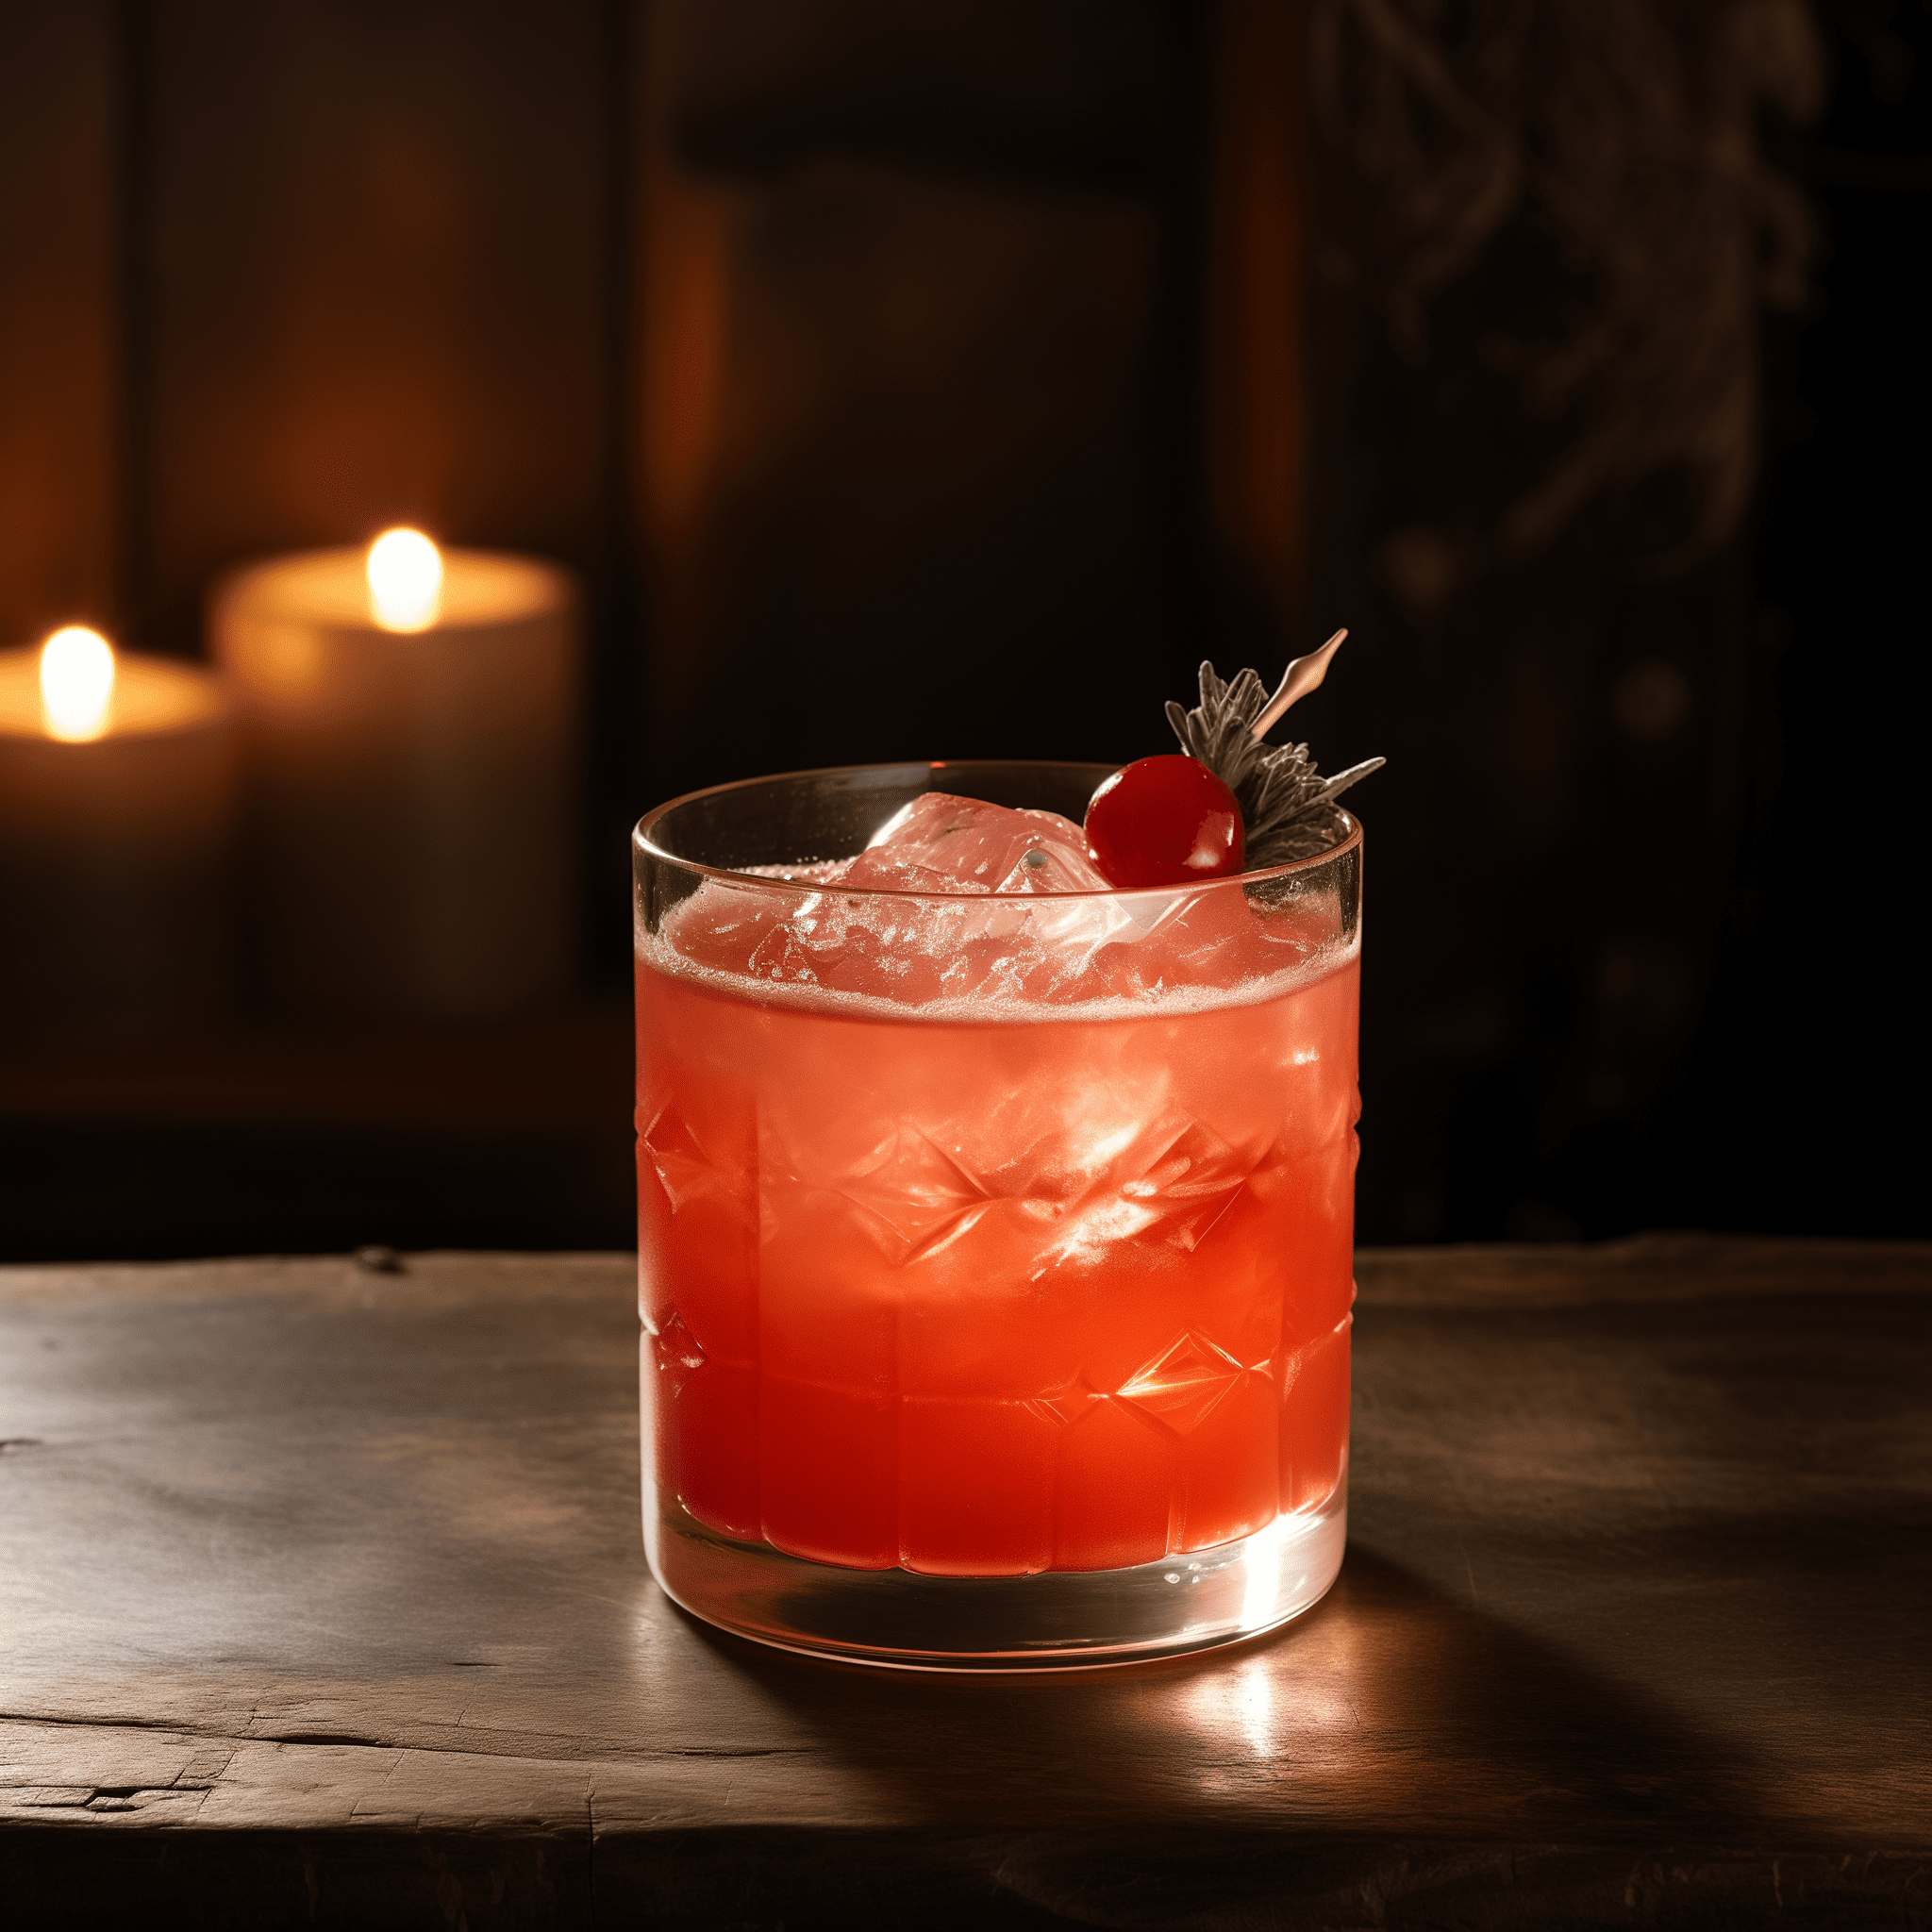 The Gravel Gertie is a briny, savory cocktail with a spicy kick from the Tabasco. The combination of vodka, clam juice, and tomato juice creates a rich, umami-laden sip that's both invigorating and bold.